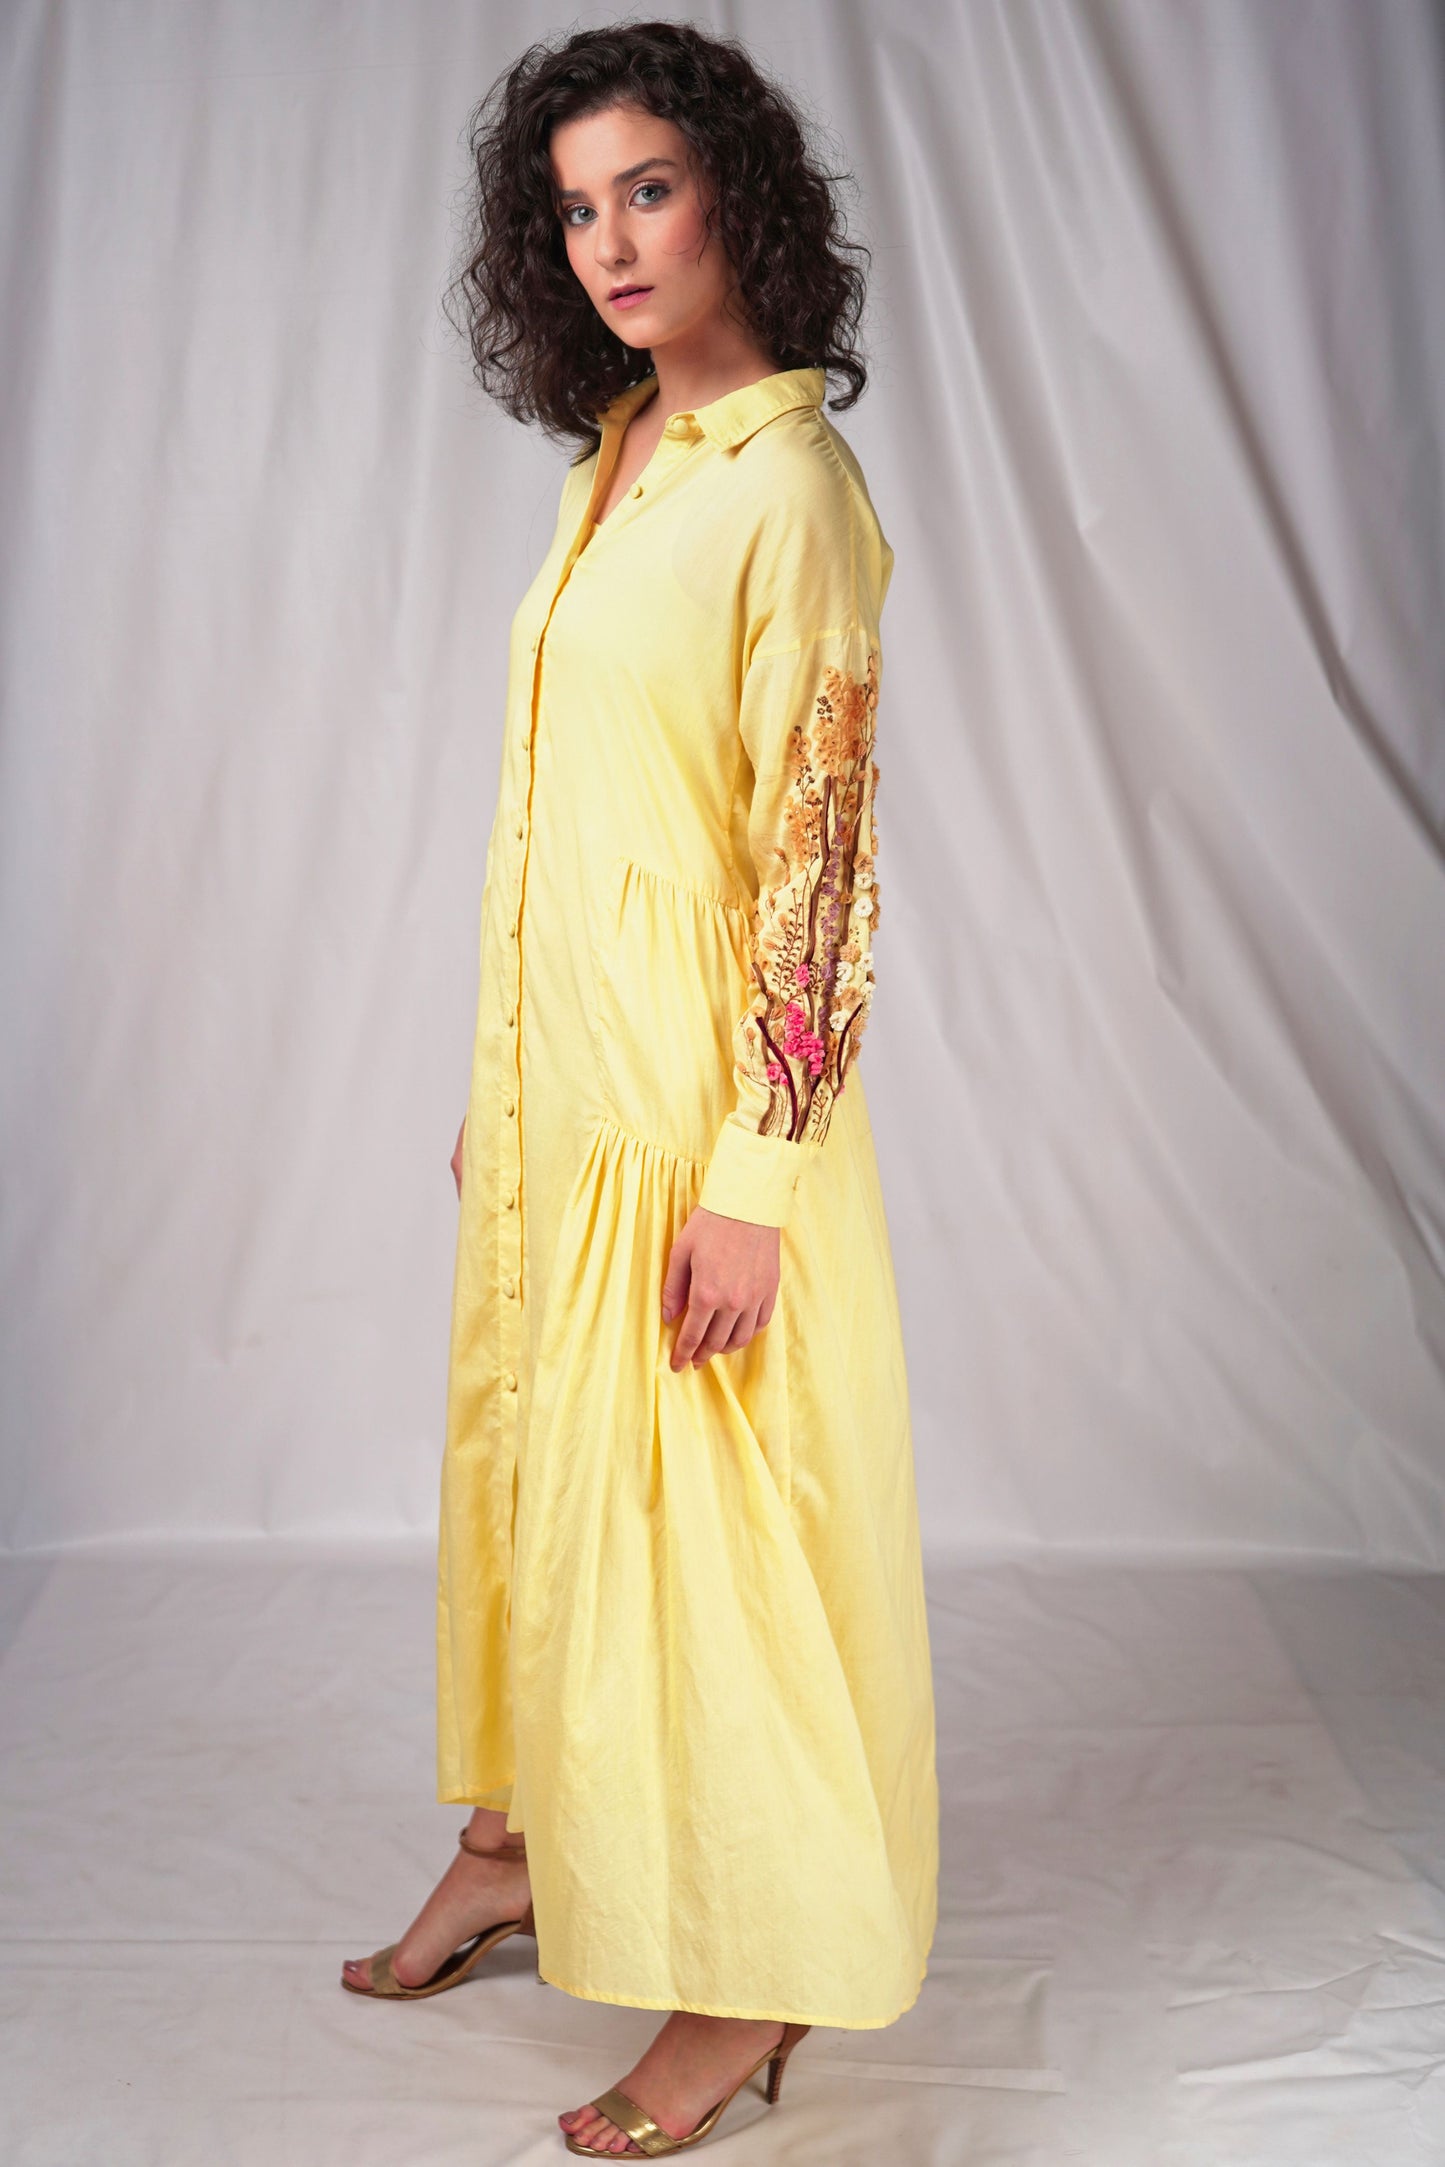 Yellow Long Dress with Embroidery Details on Sleeves